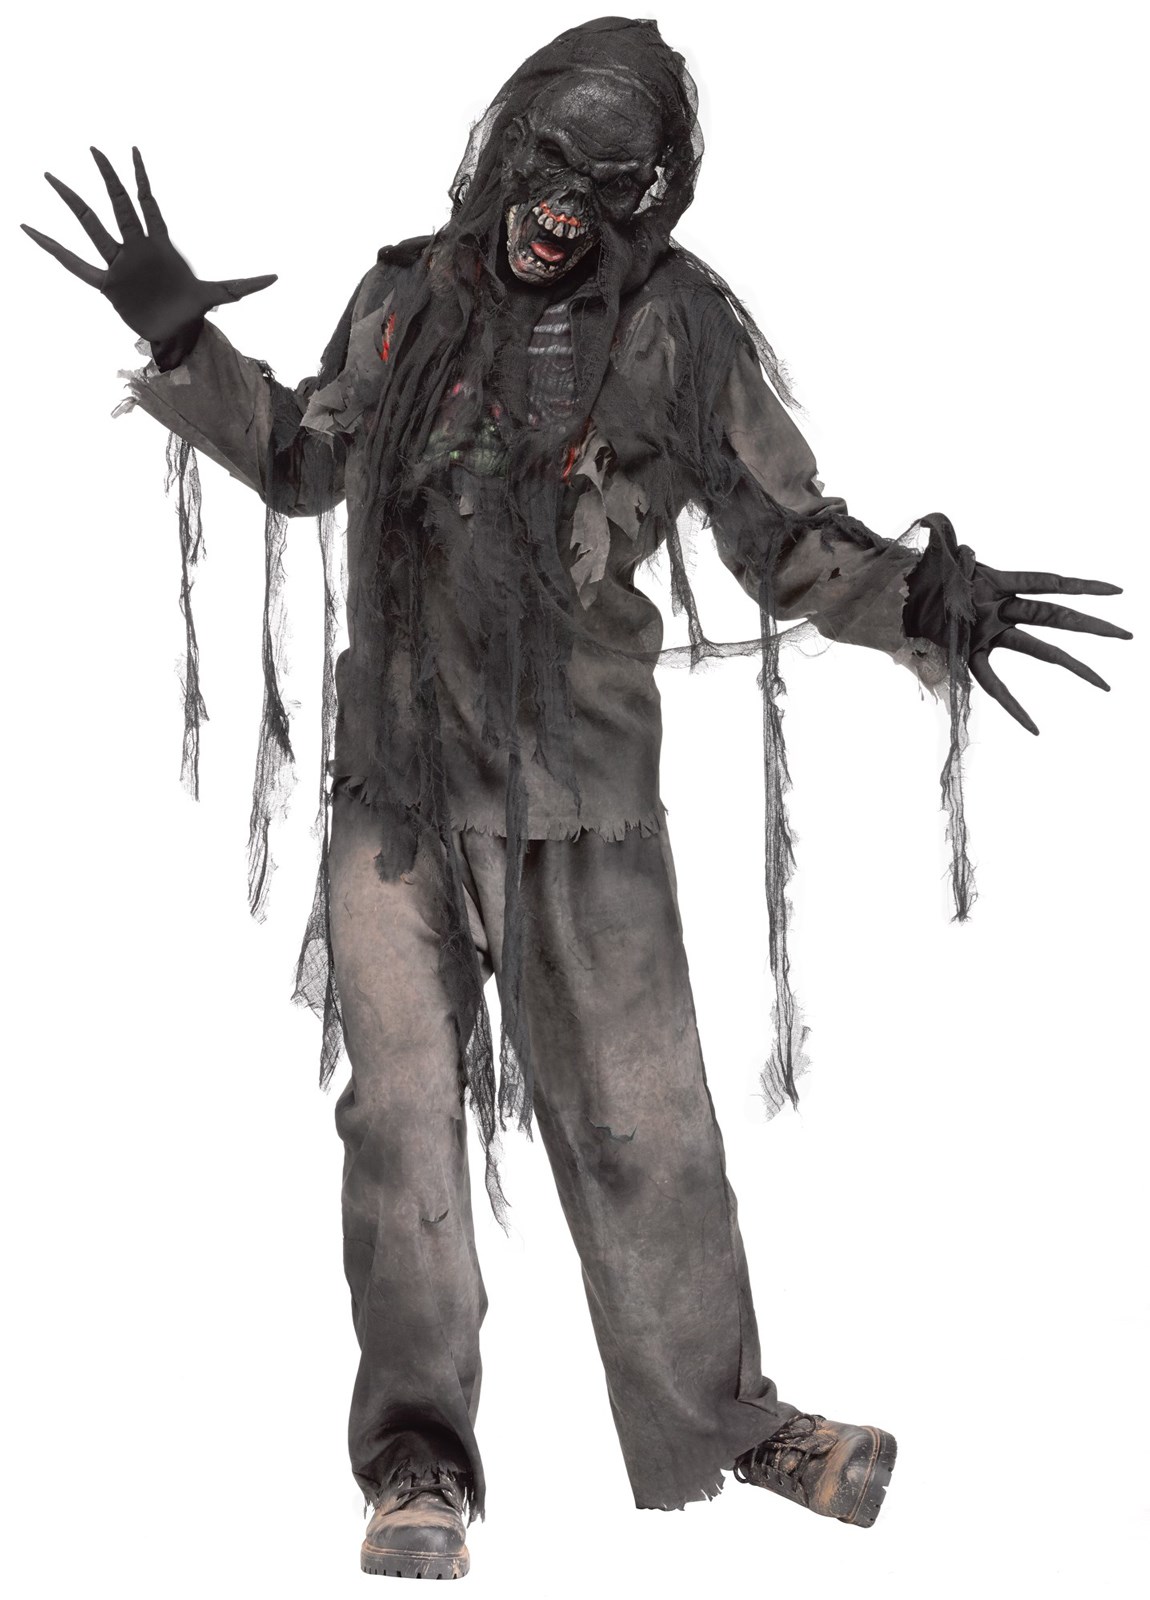 Burnt Zombie Costume For Adults | BuyCostumes.com